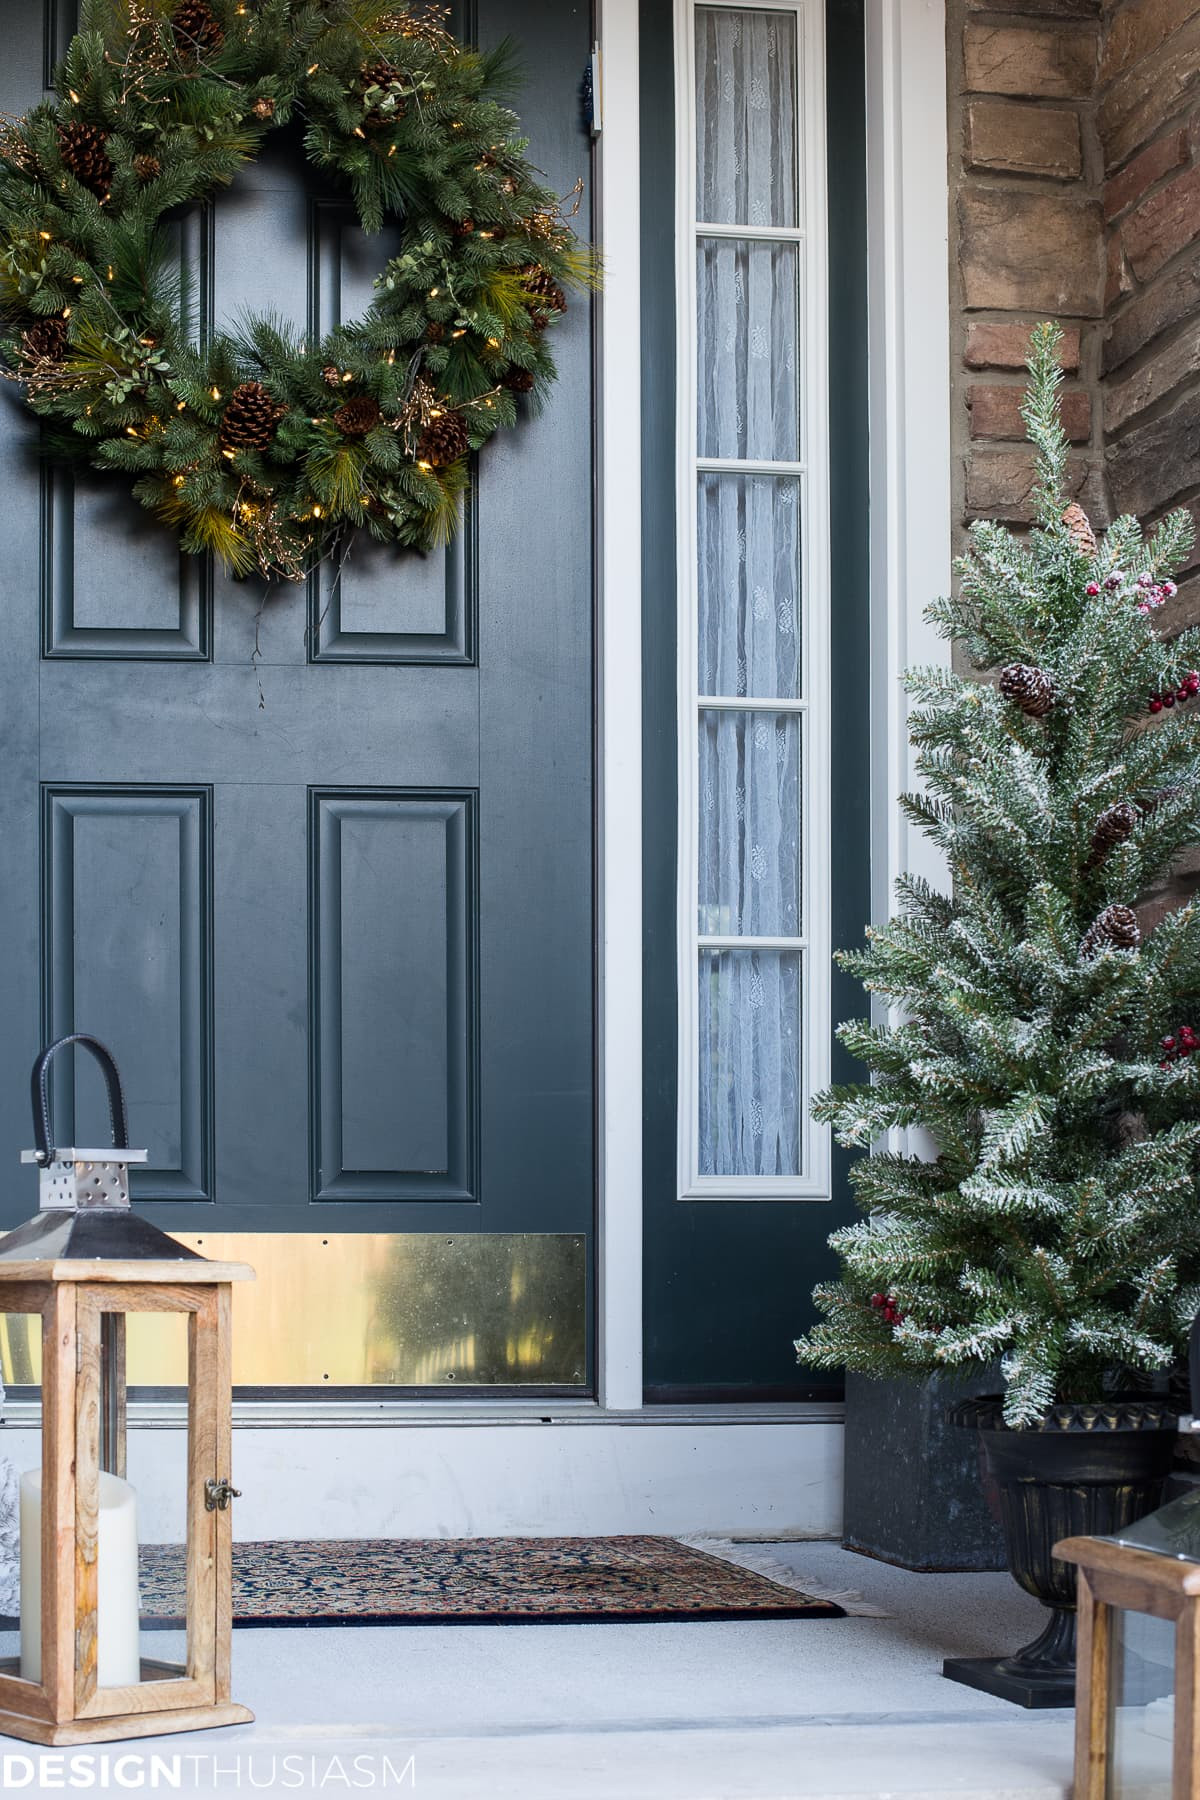 Front Porch Christmas Ideas
 Easy Outdoor Christmas Decorating Ideas for a Tiny Front Porch